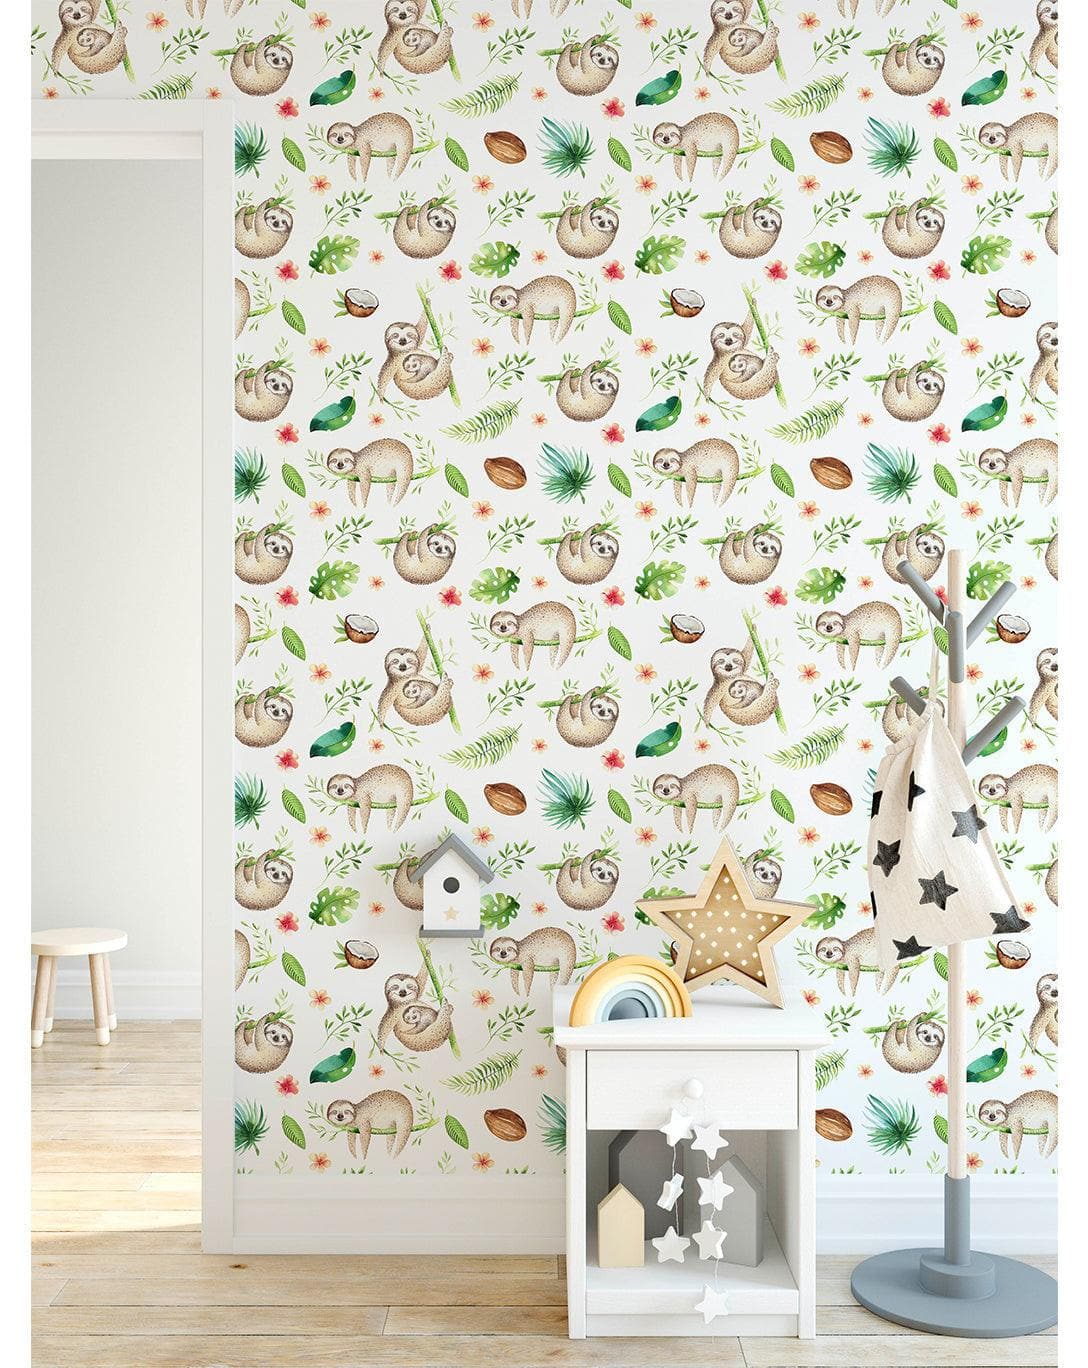 Cute Baby Sloth Kids Room Removable Wallpaper - MAIA HOMES